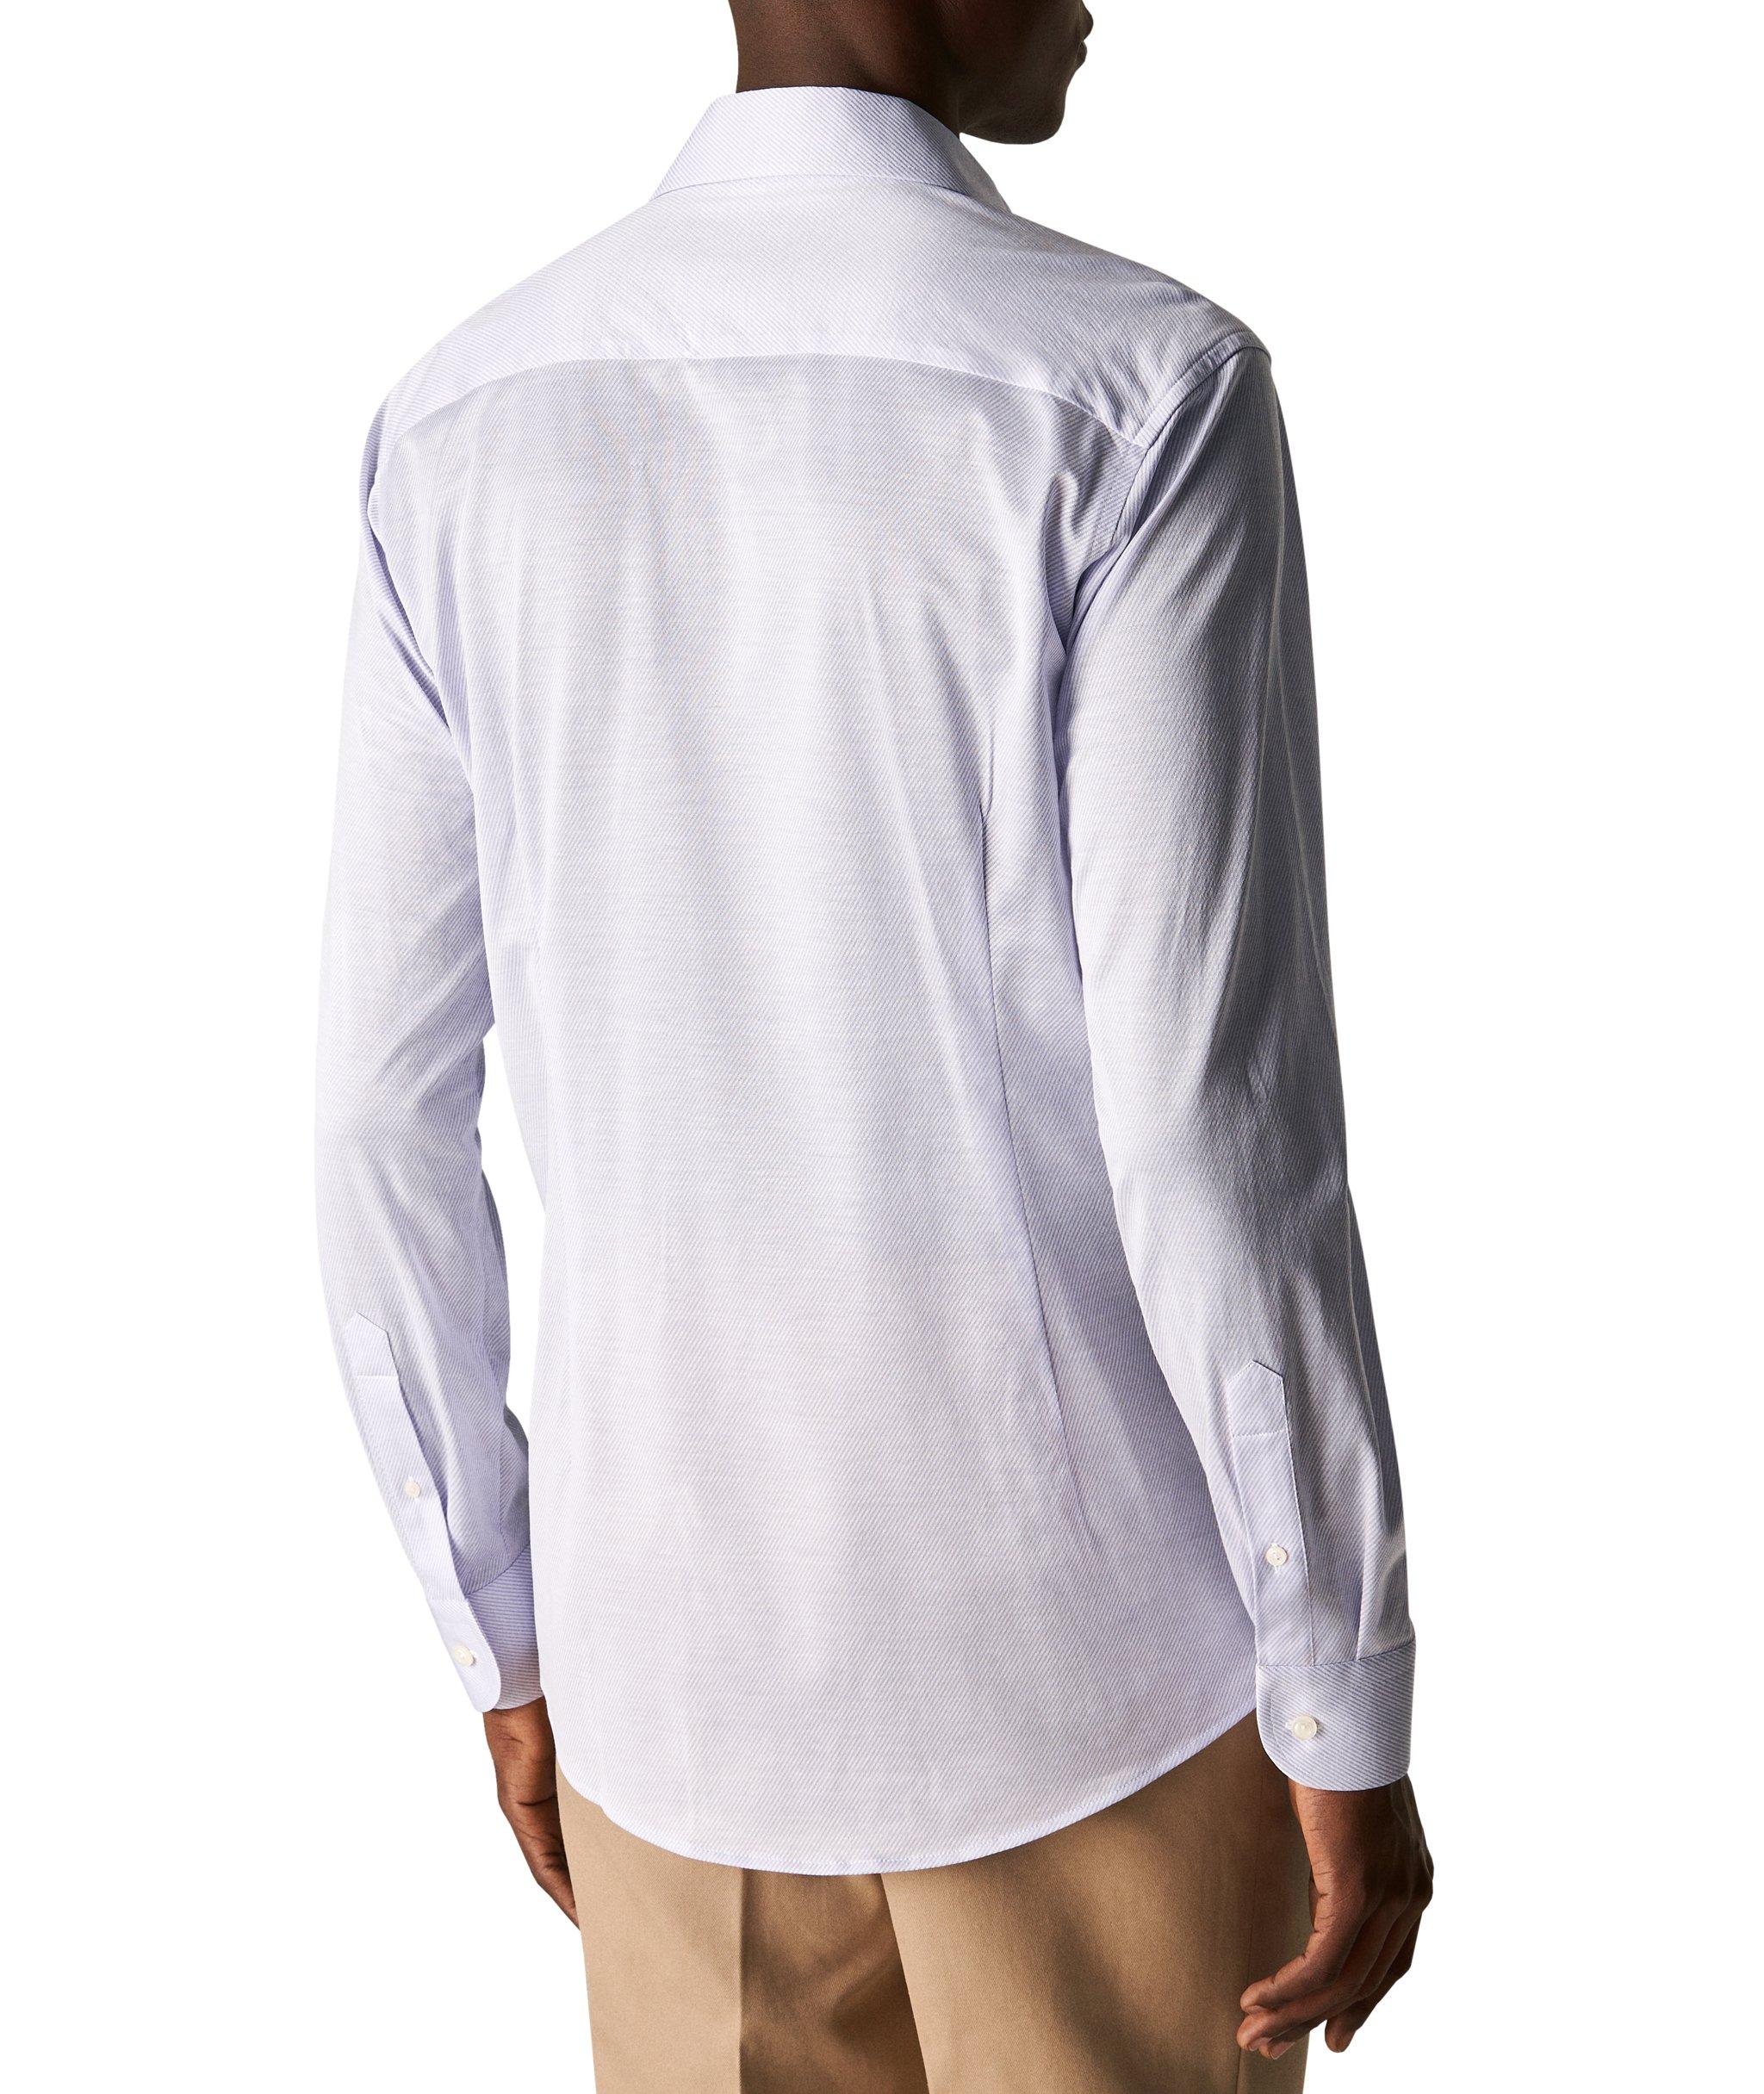 Slim Fit Luxe Knit Shirt image 2